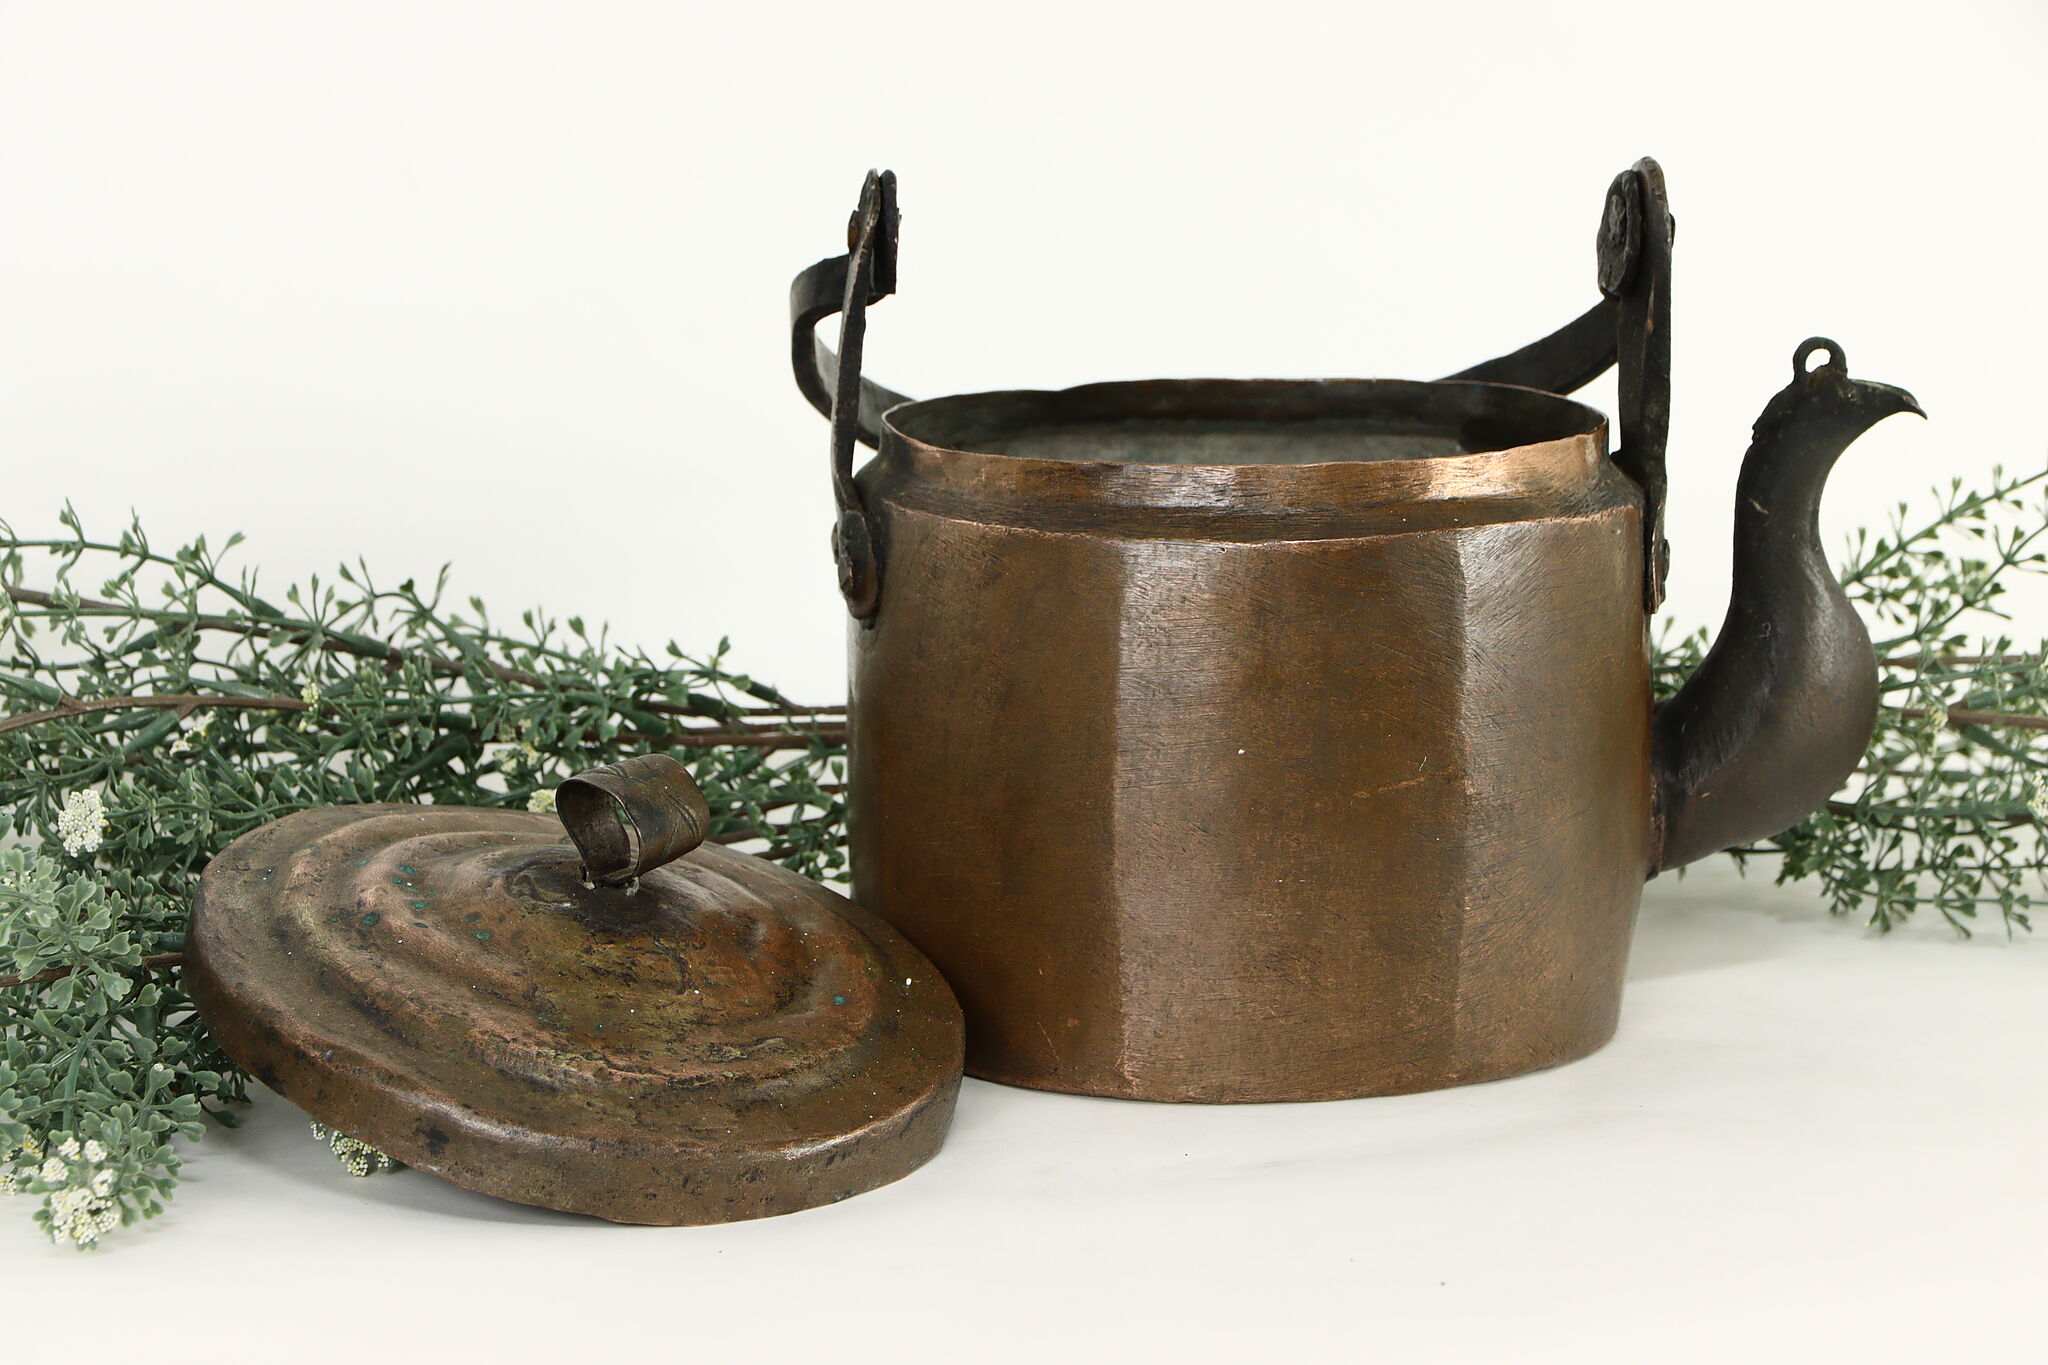 Large 19th Century Copper Cooking Pot, 1850s